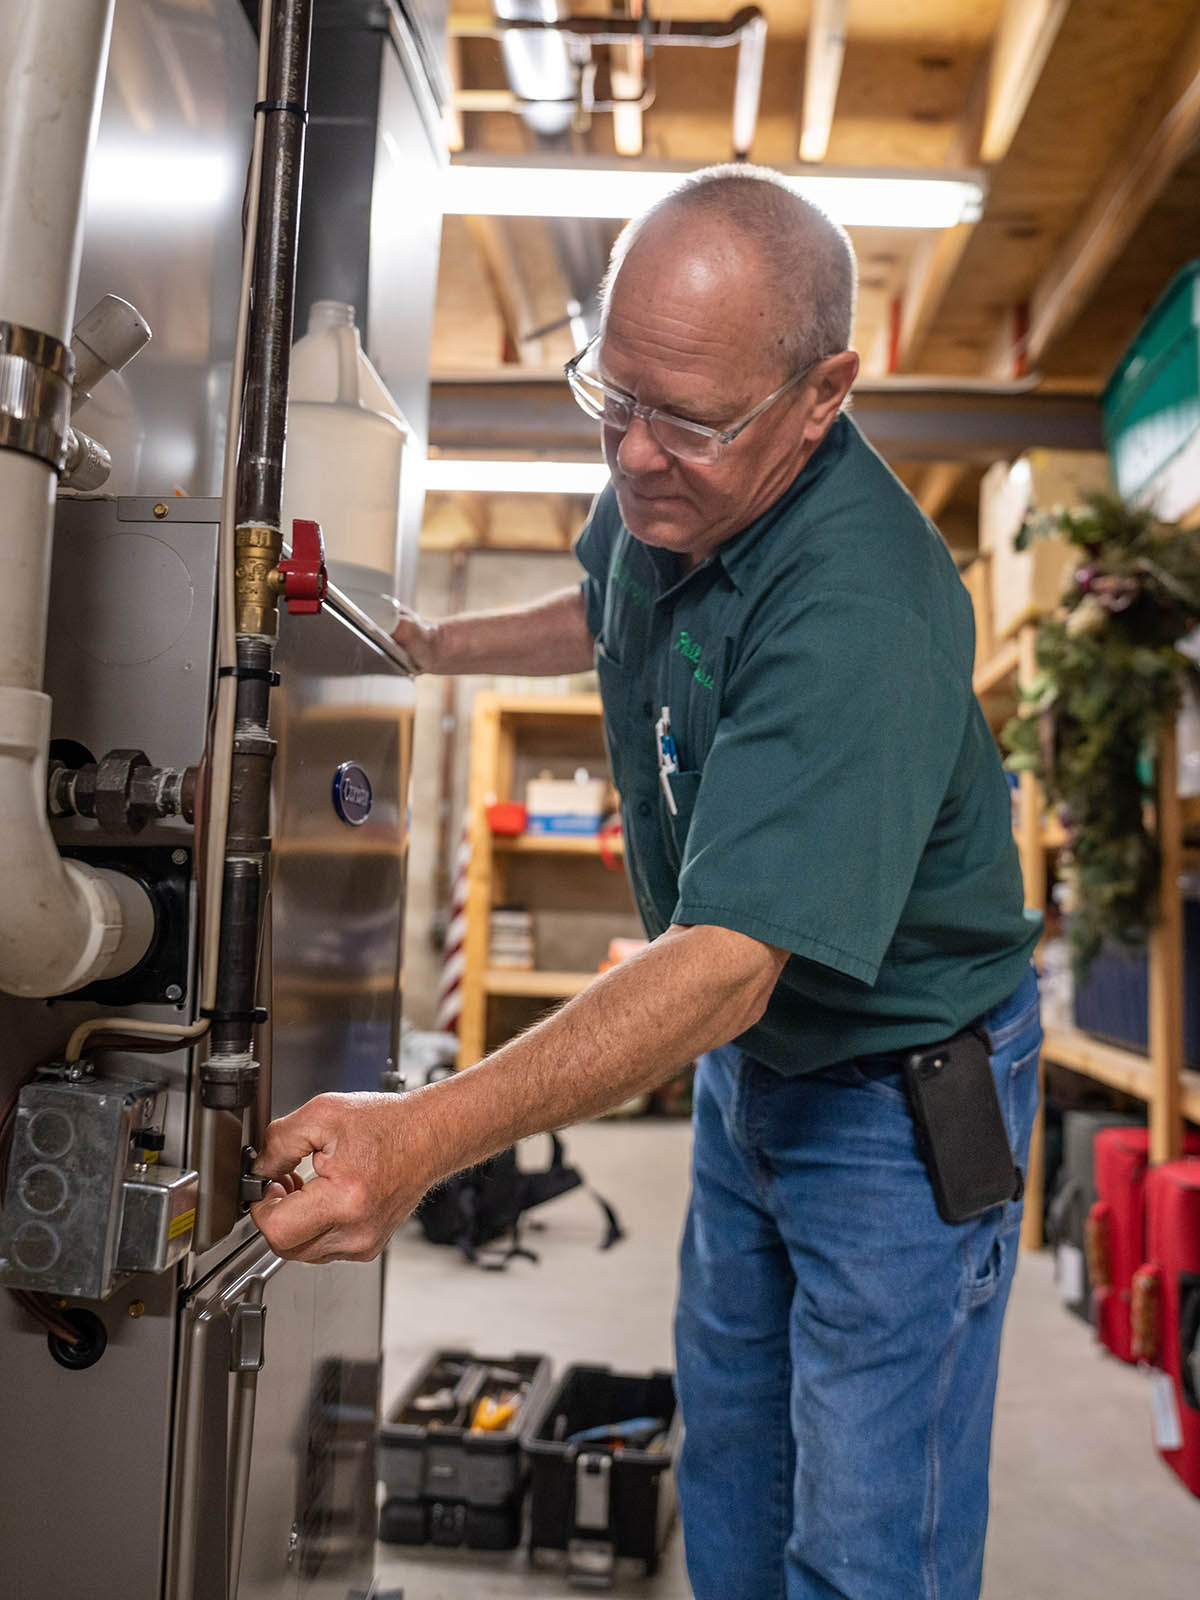 Phil Salsbury, McElroy’s residential HVAC technician, performs scheduled maintenance on a customer’s furnace.